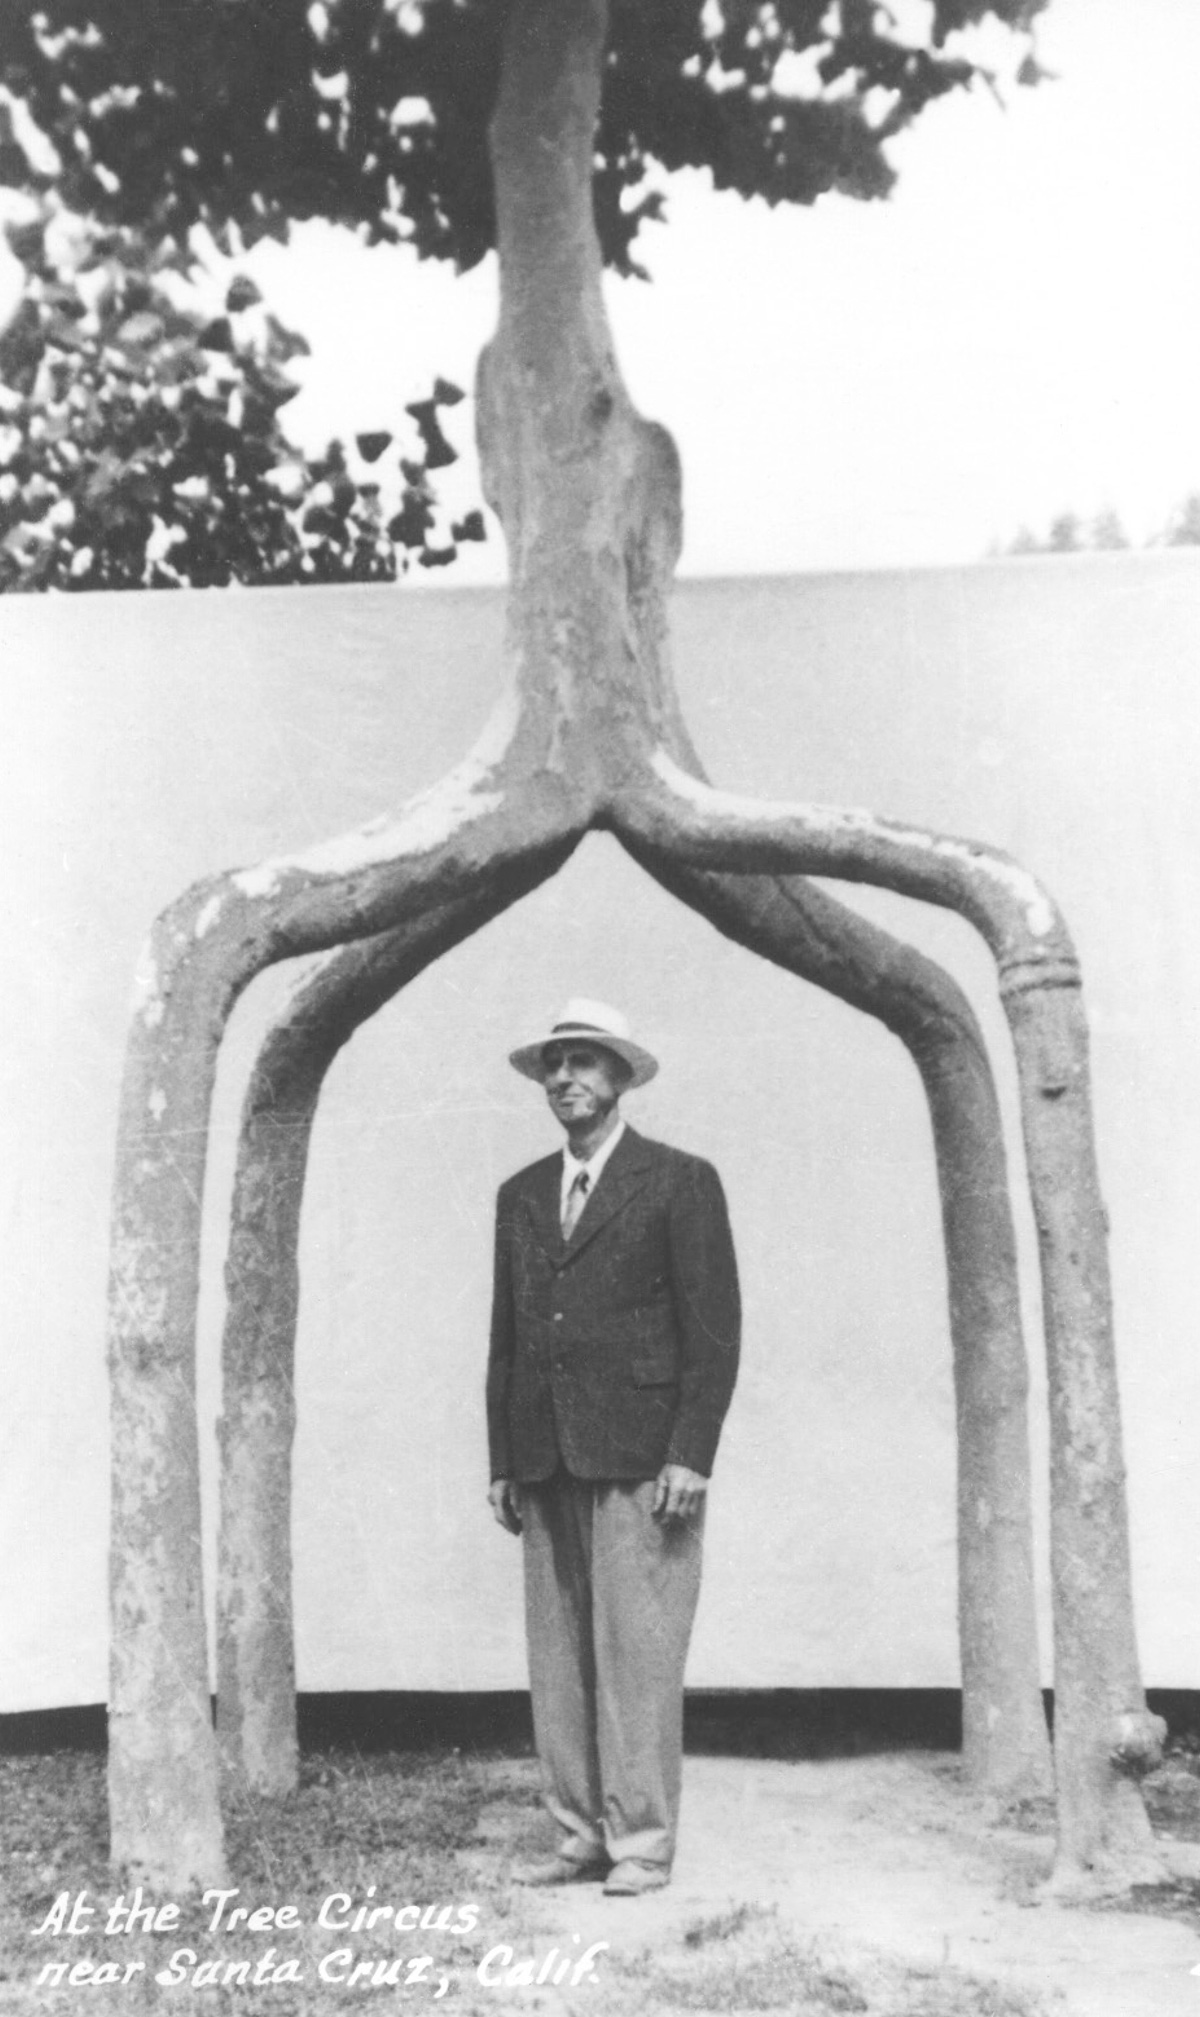 A photograph of Axel Erlandson under one of his arborsculptures.